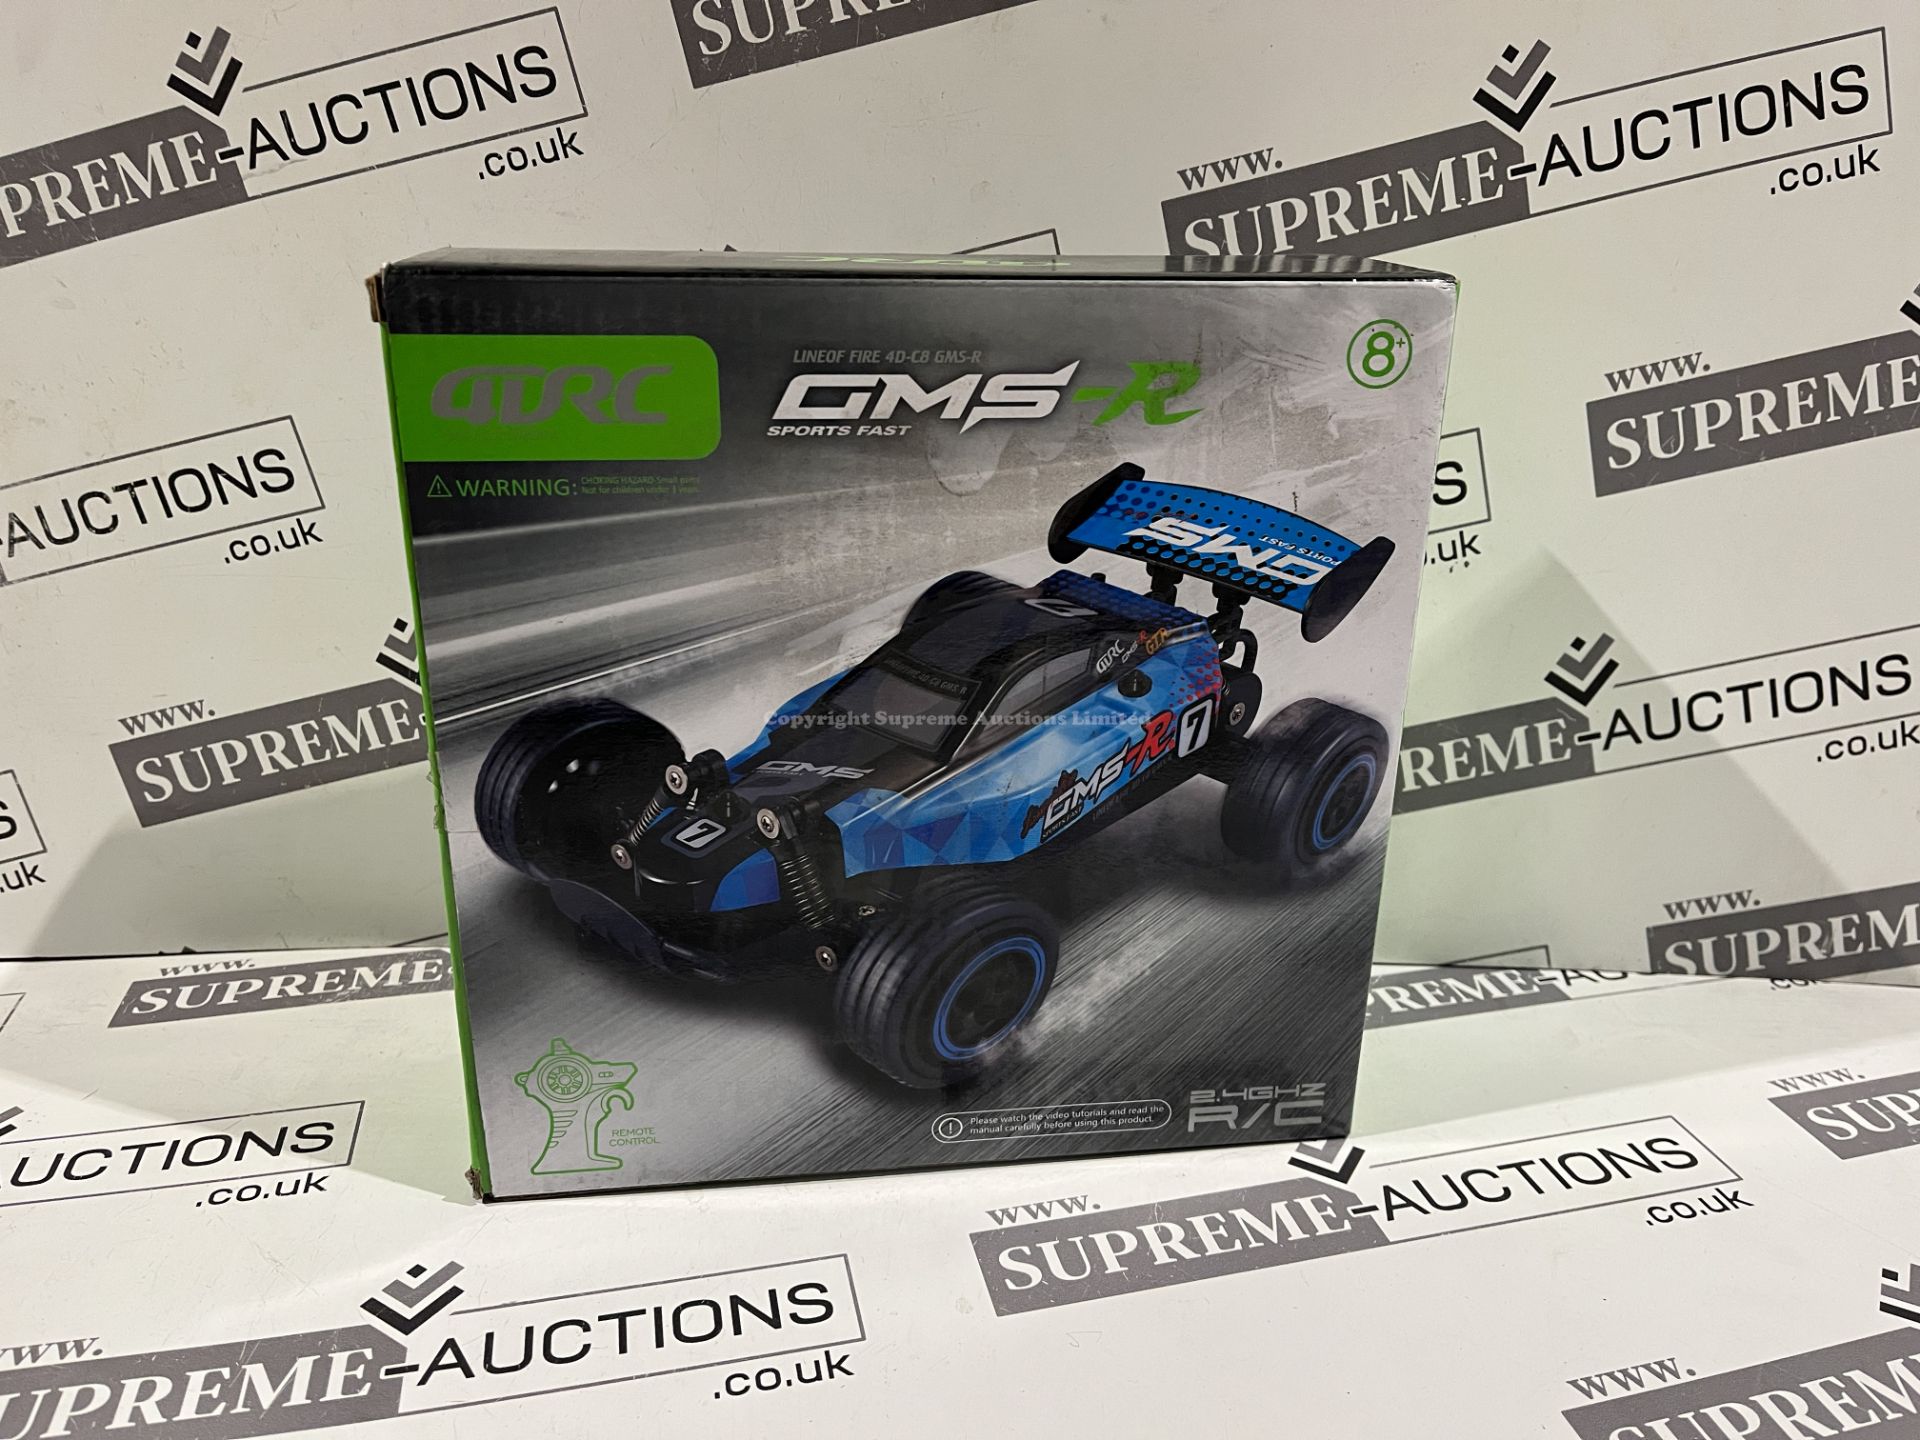 5 X BOXED 4DRC CMS FAST LINE OF FIRE REMOTE CONTROL SPORTS CARS (UNCHECKED, UNTESTED) R6-4